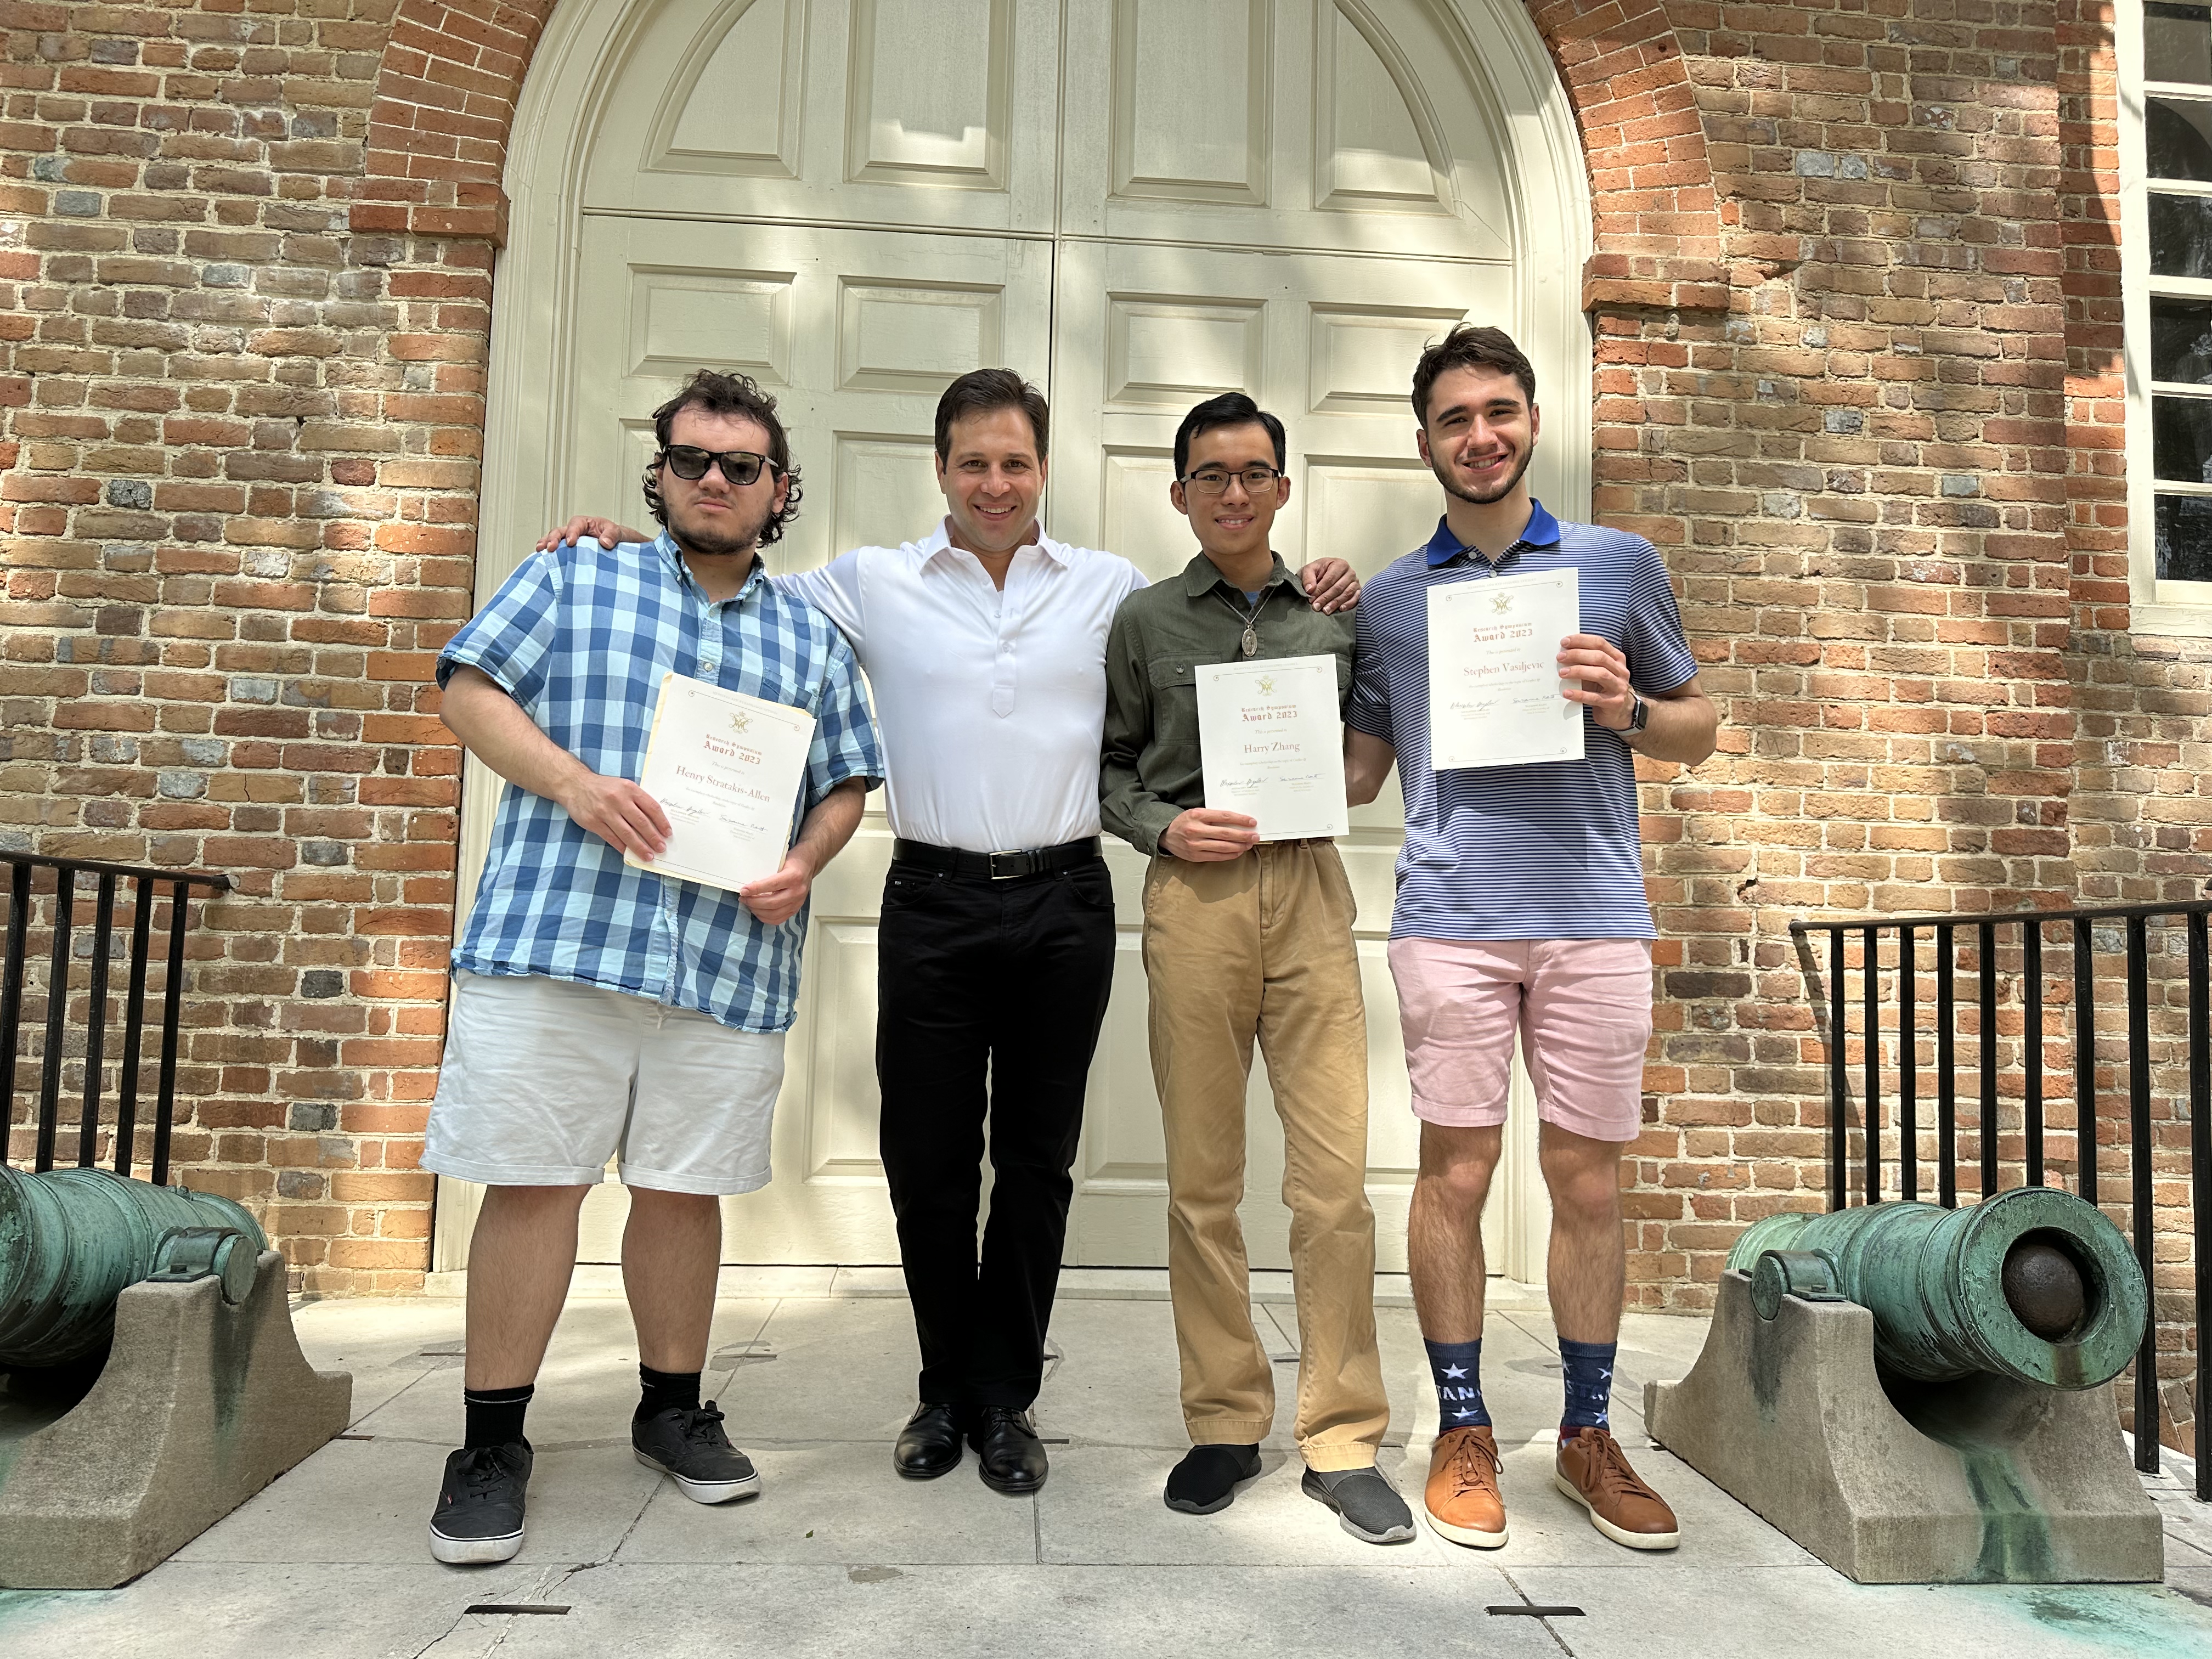 This year's award recipients (from left to right), Henry Stratakis-Allen, Harry Zhang, and Stephen Vasiljevic stand outside the Wren Building with Dr. Alexander Angelov, Director of the Medieval and Renaissance Studies Program.